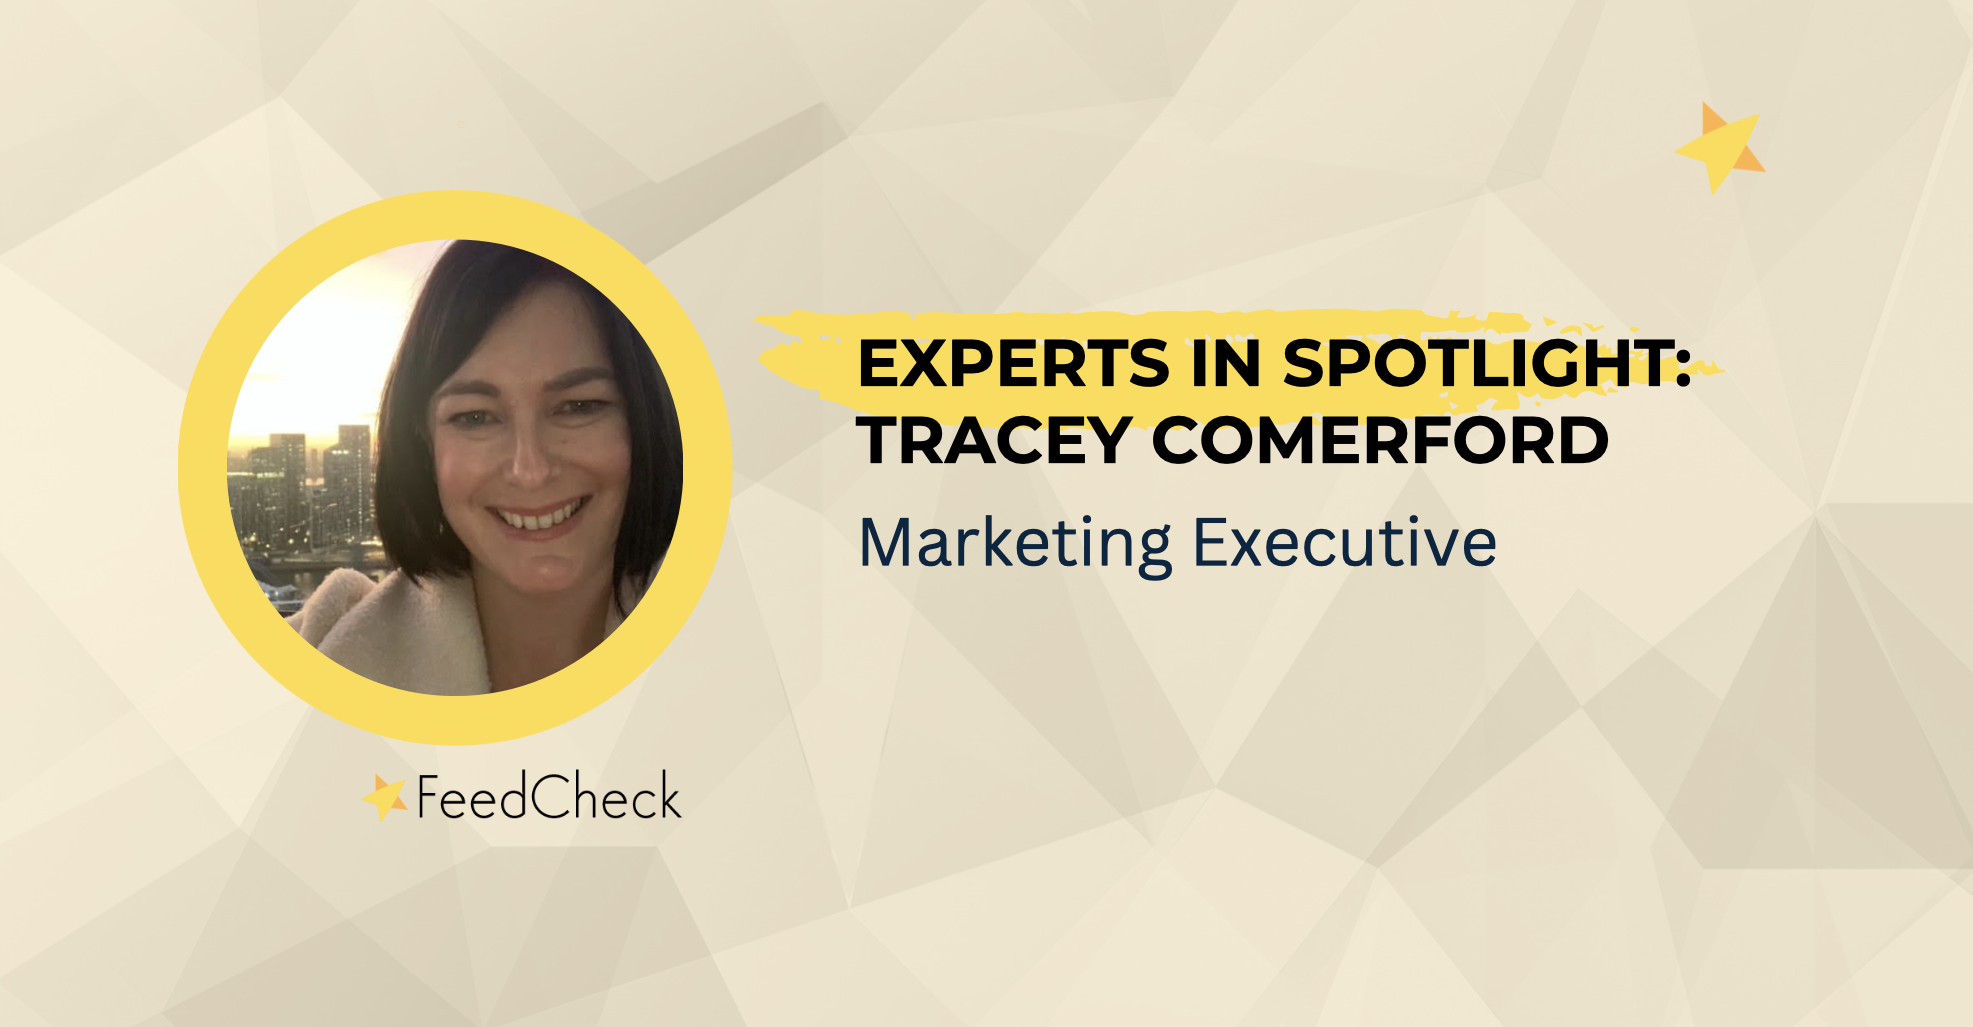 Experts in Spotlight: Tracey Comerford – Marketing Executive